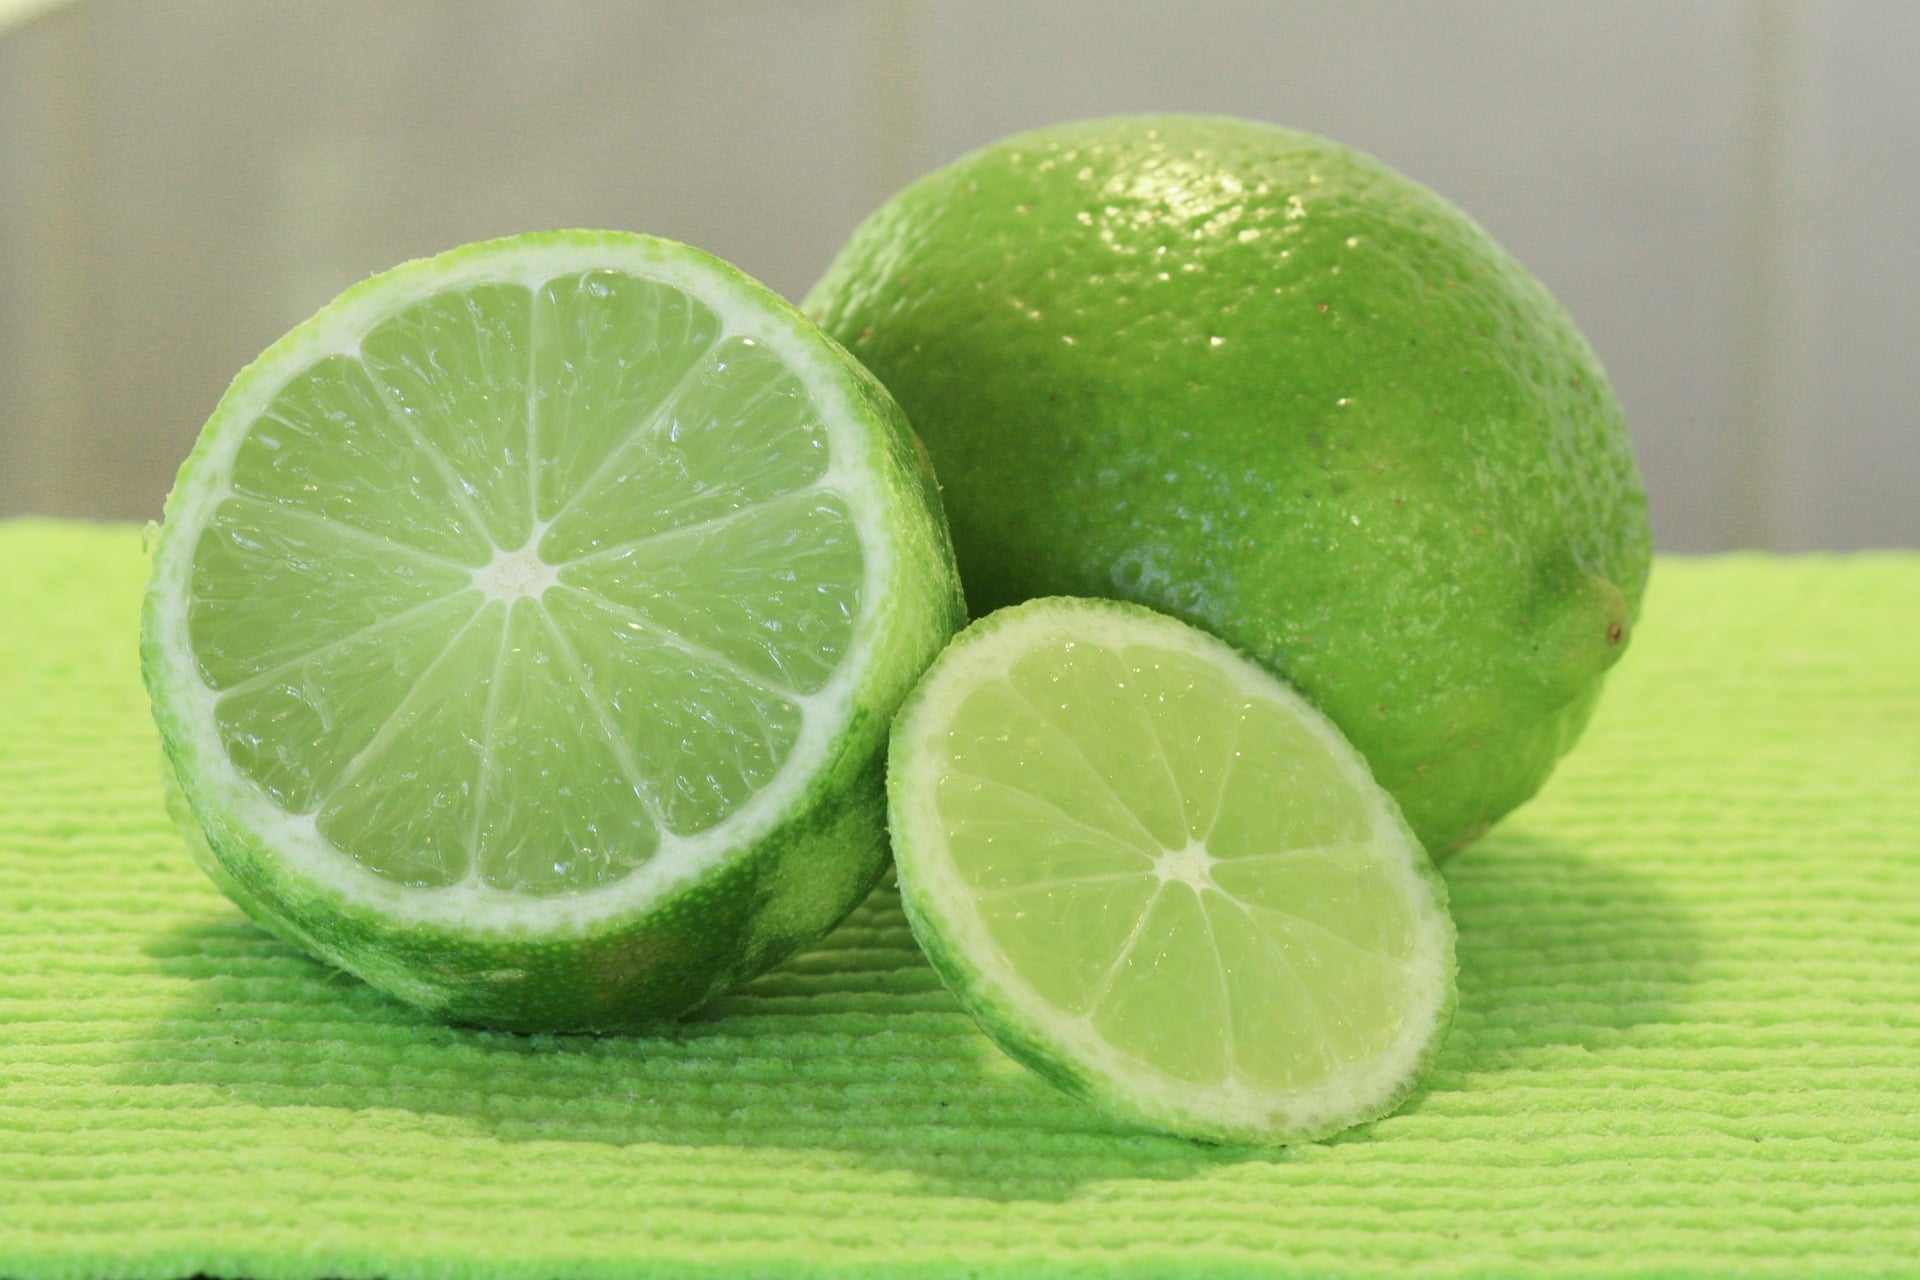 lime juice substitutes